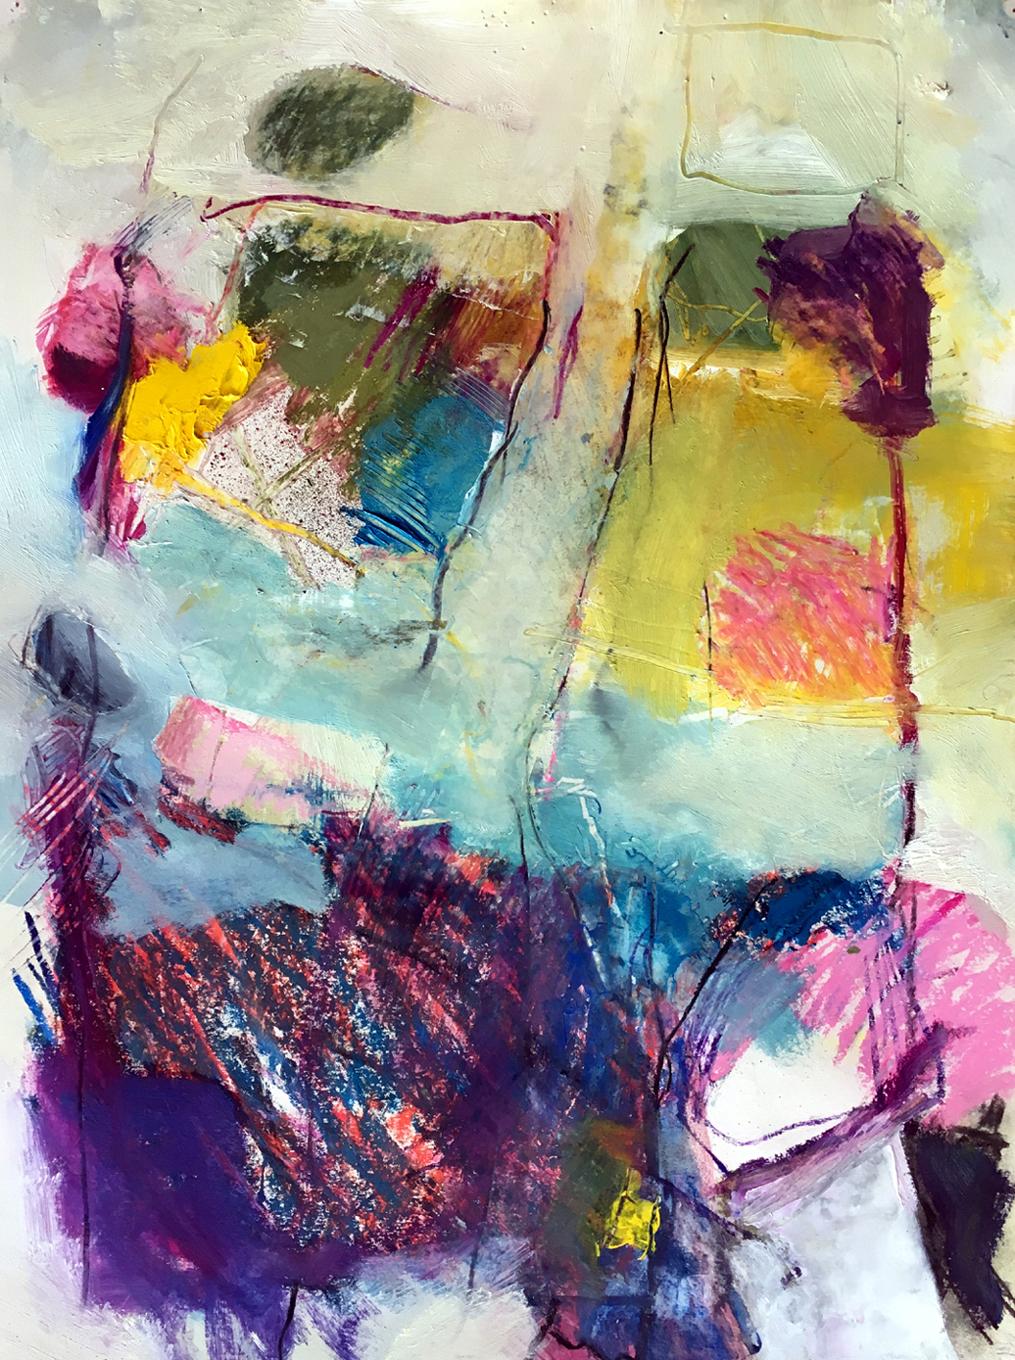 Jon Rowland Abstract Painting - Distance Lends Enchantment, Abstract Purple Yellow Green Pink Art, Contemporary 